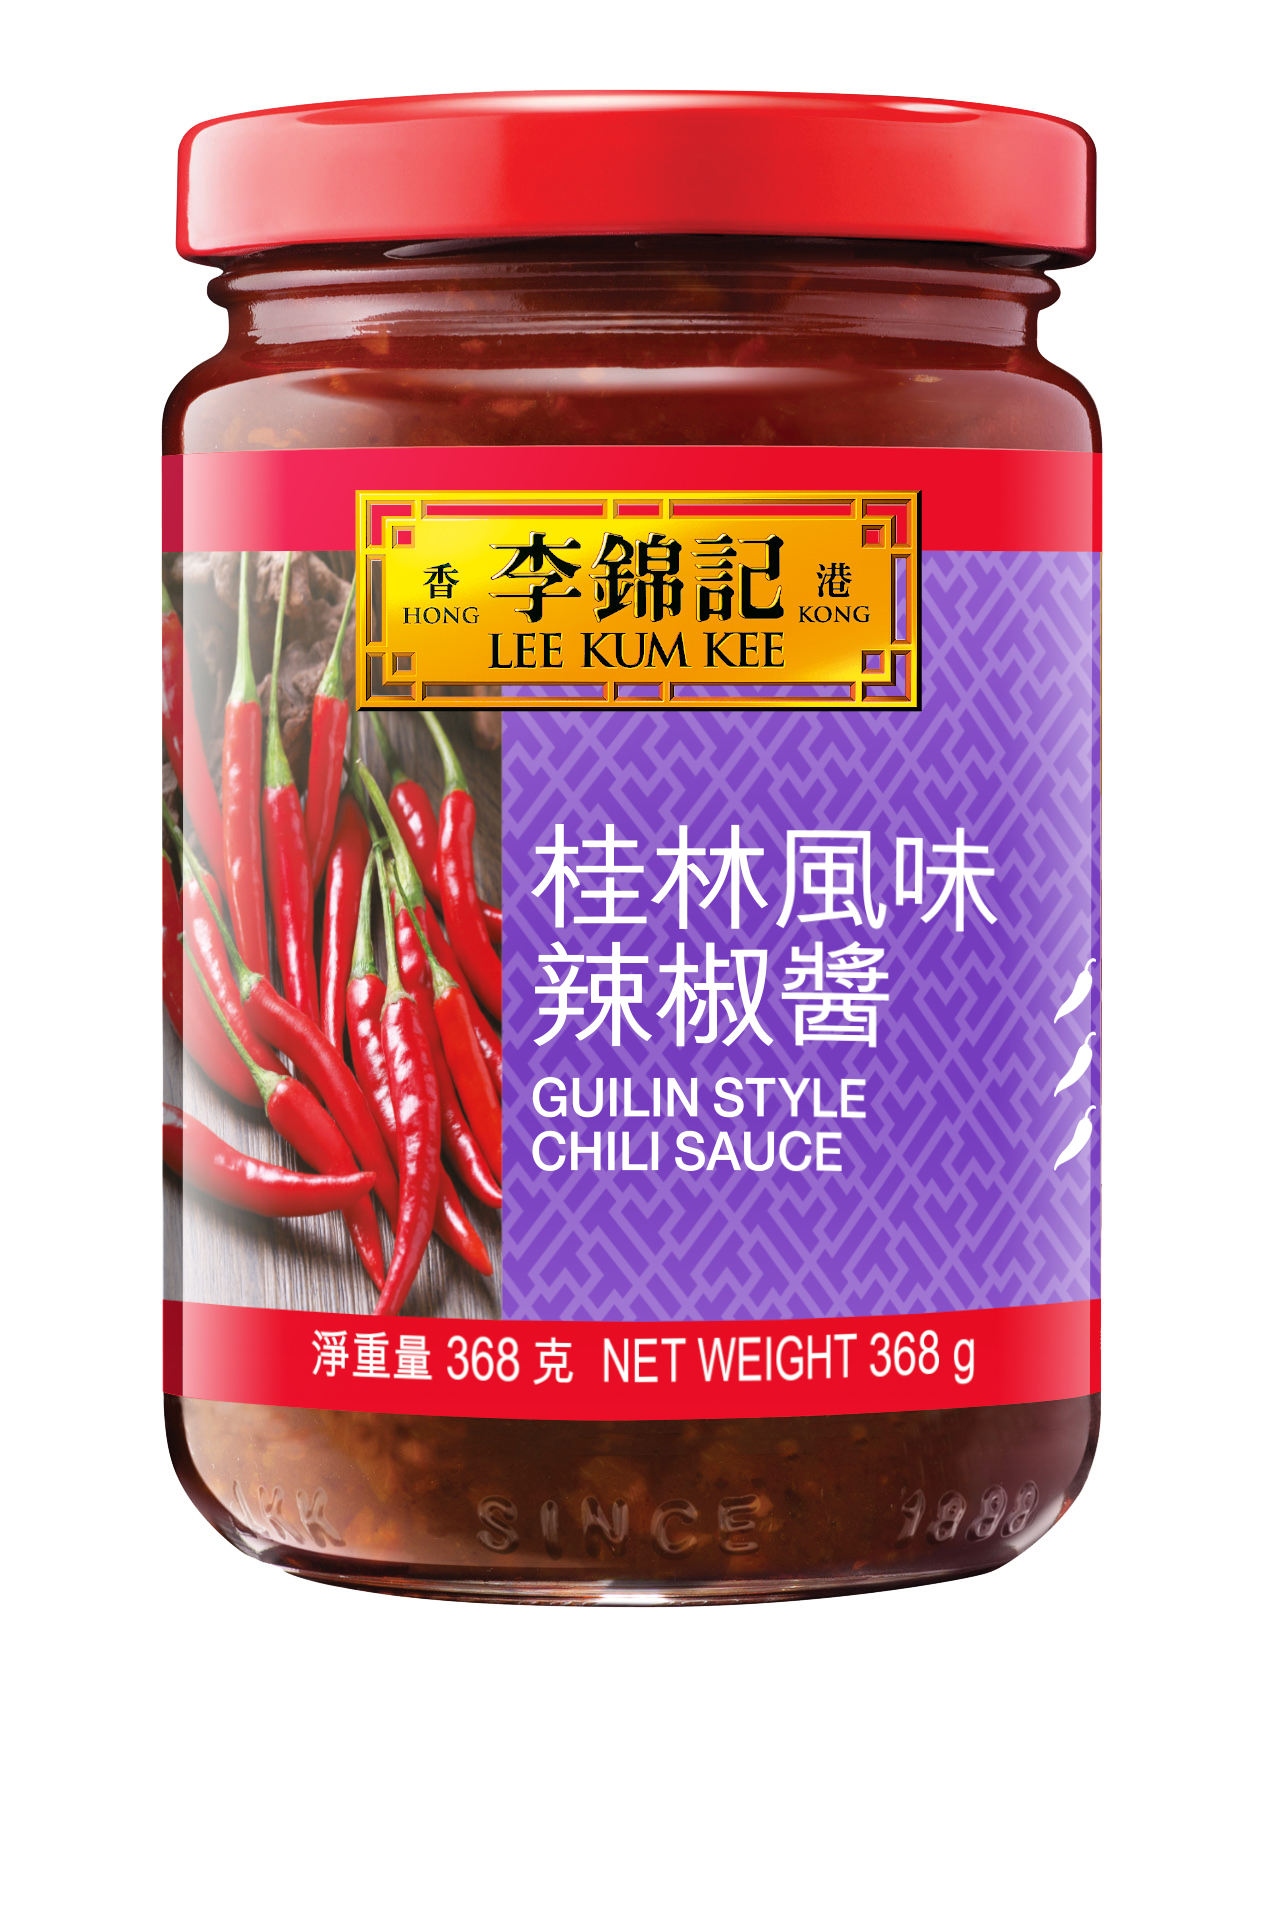 Guilin Style Chili Sauce 368G TW